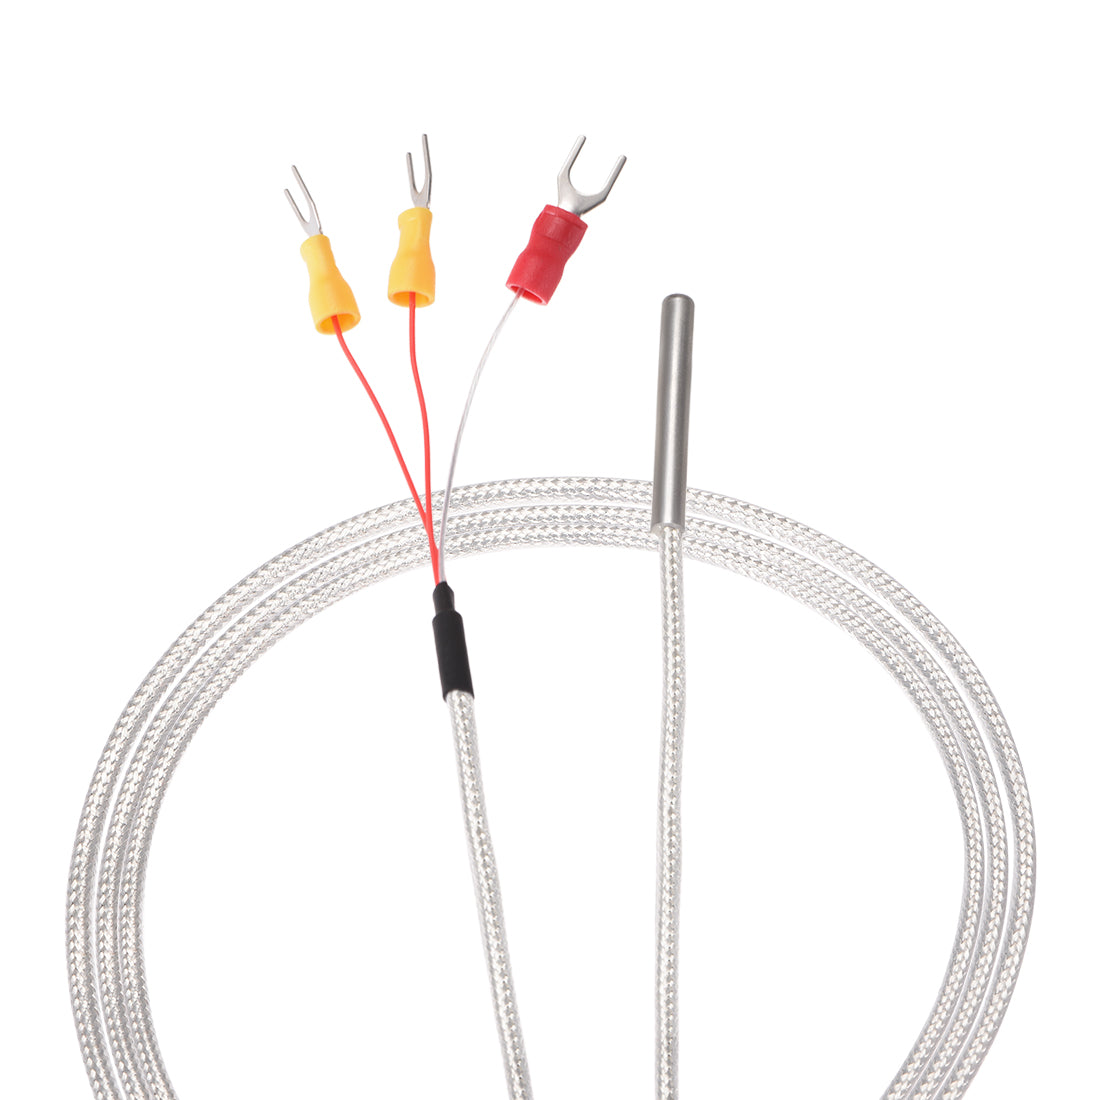 uxcell Uxcell PT100 RTD Temperature Sensor Probe Three-wire System Cable Thermocouple Stainless Steel 50cm(1.64ft) (Temperature Rang: -50 to 200°C)